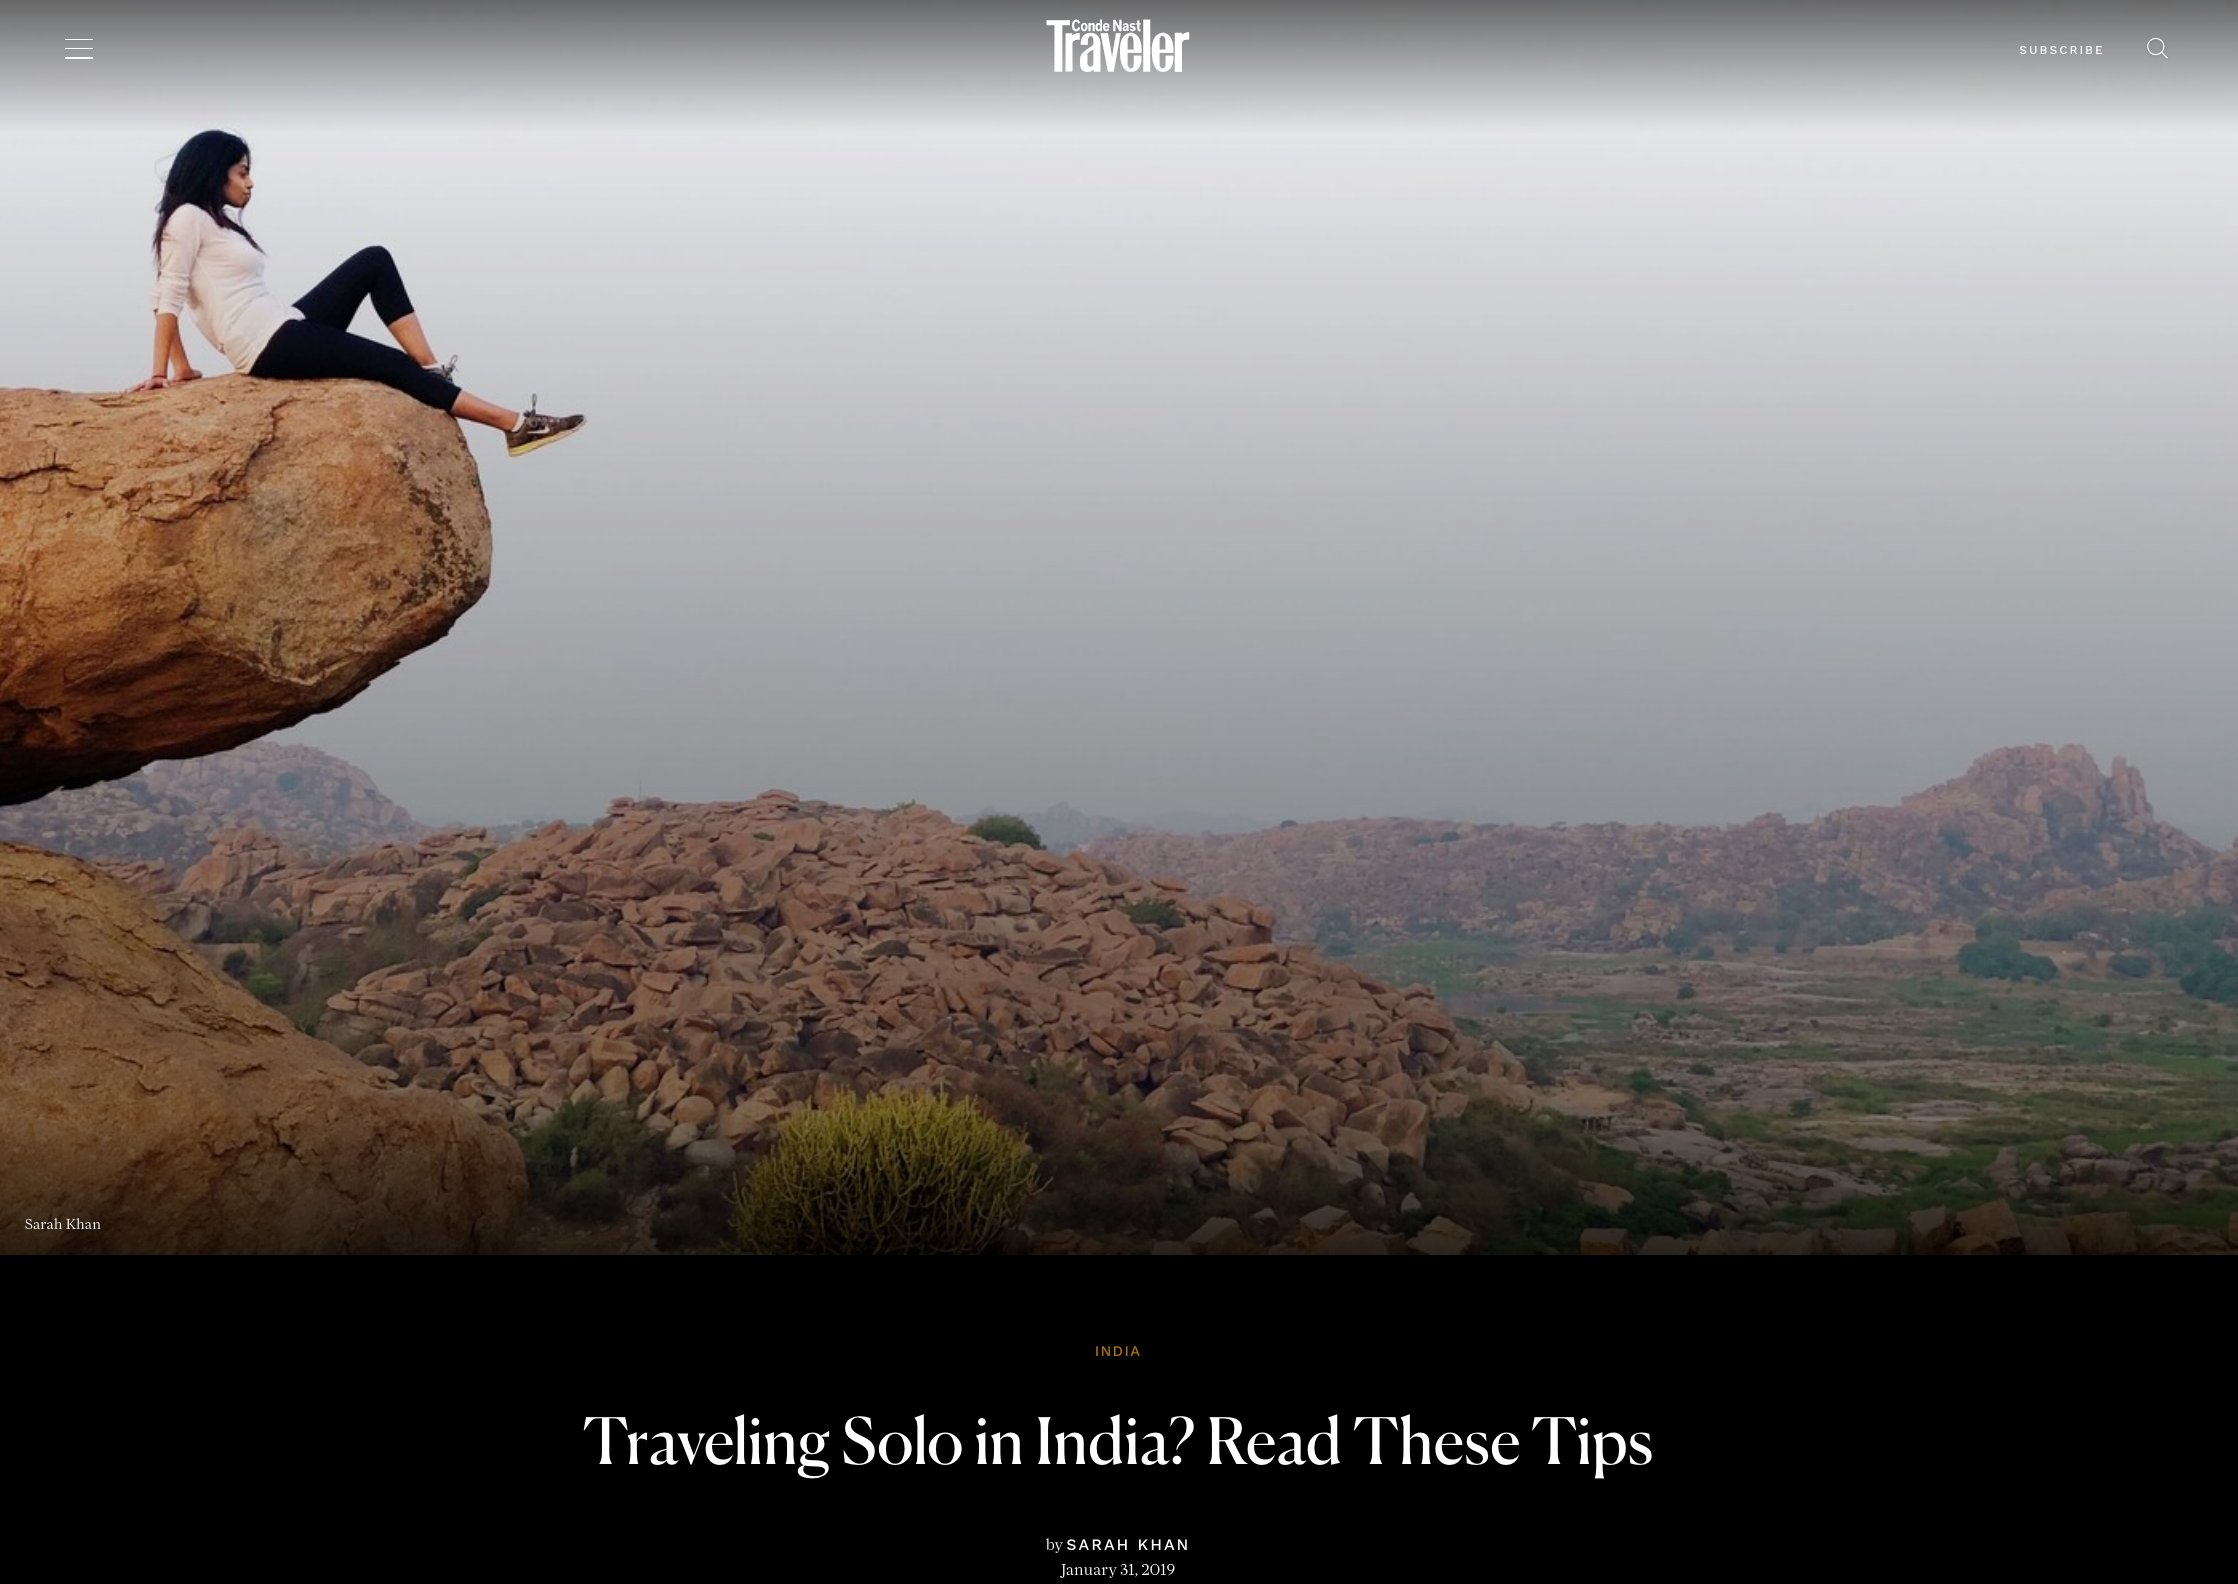 Condé Nast Traveler: Traveling Solo in India?